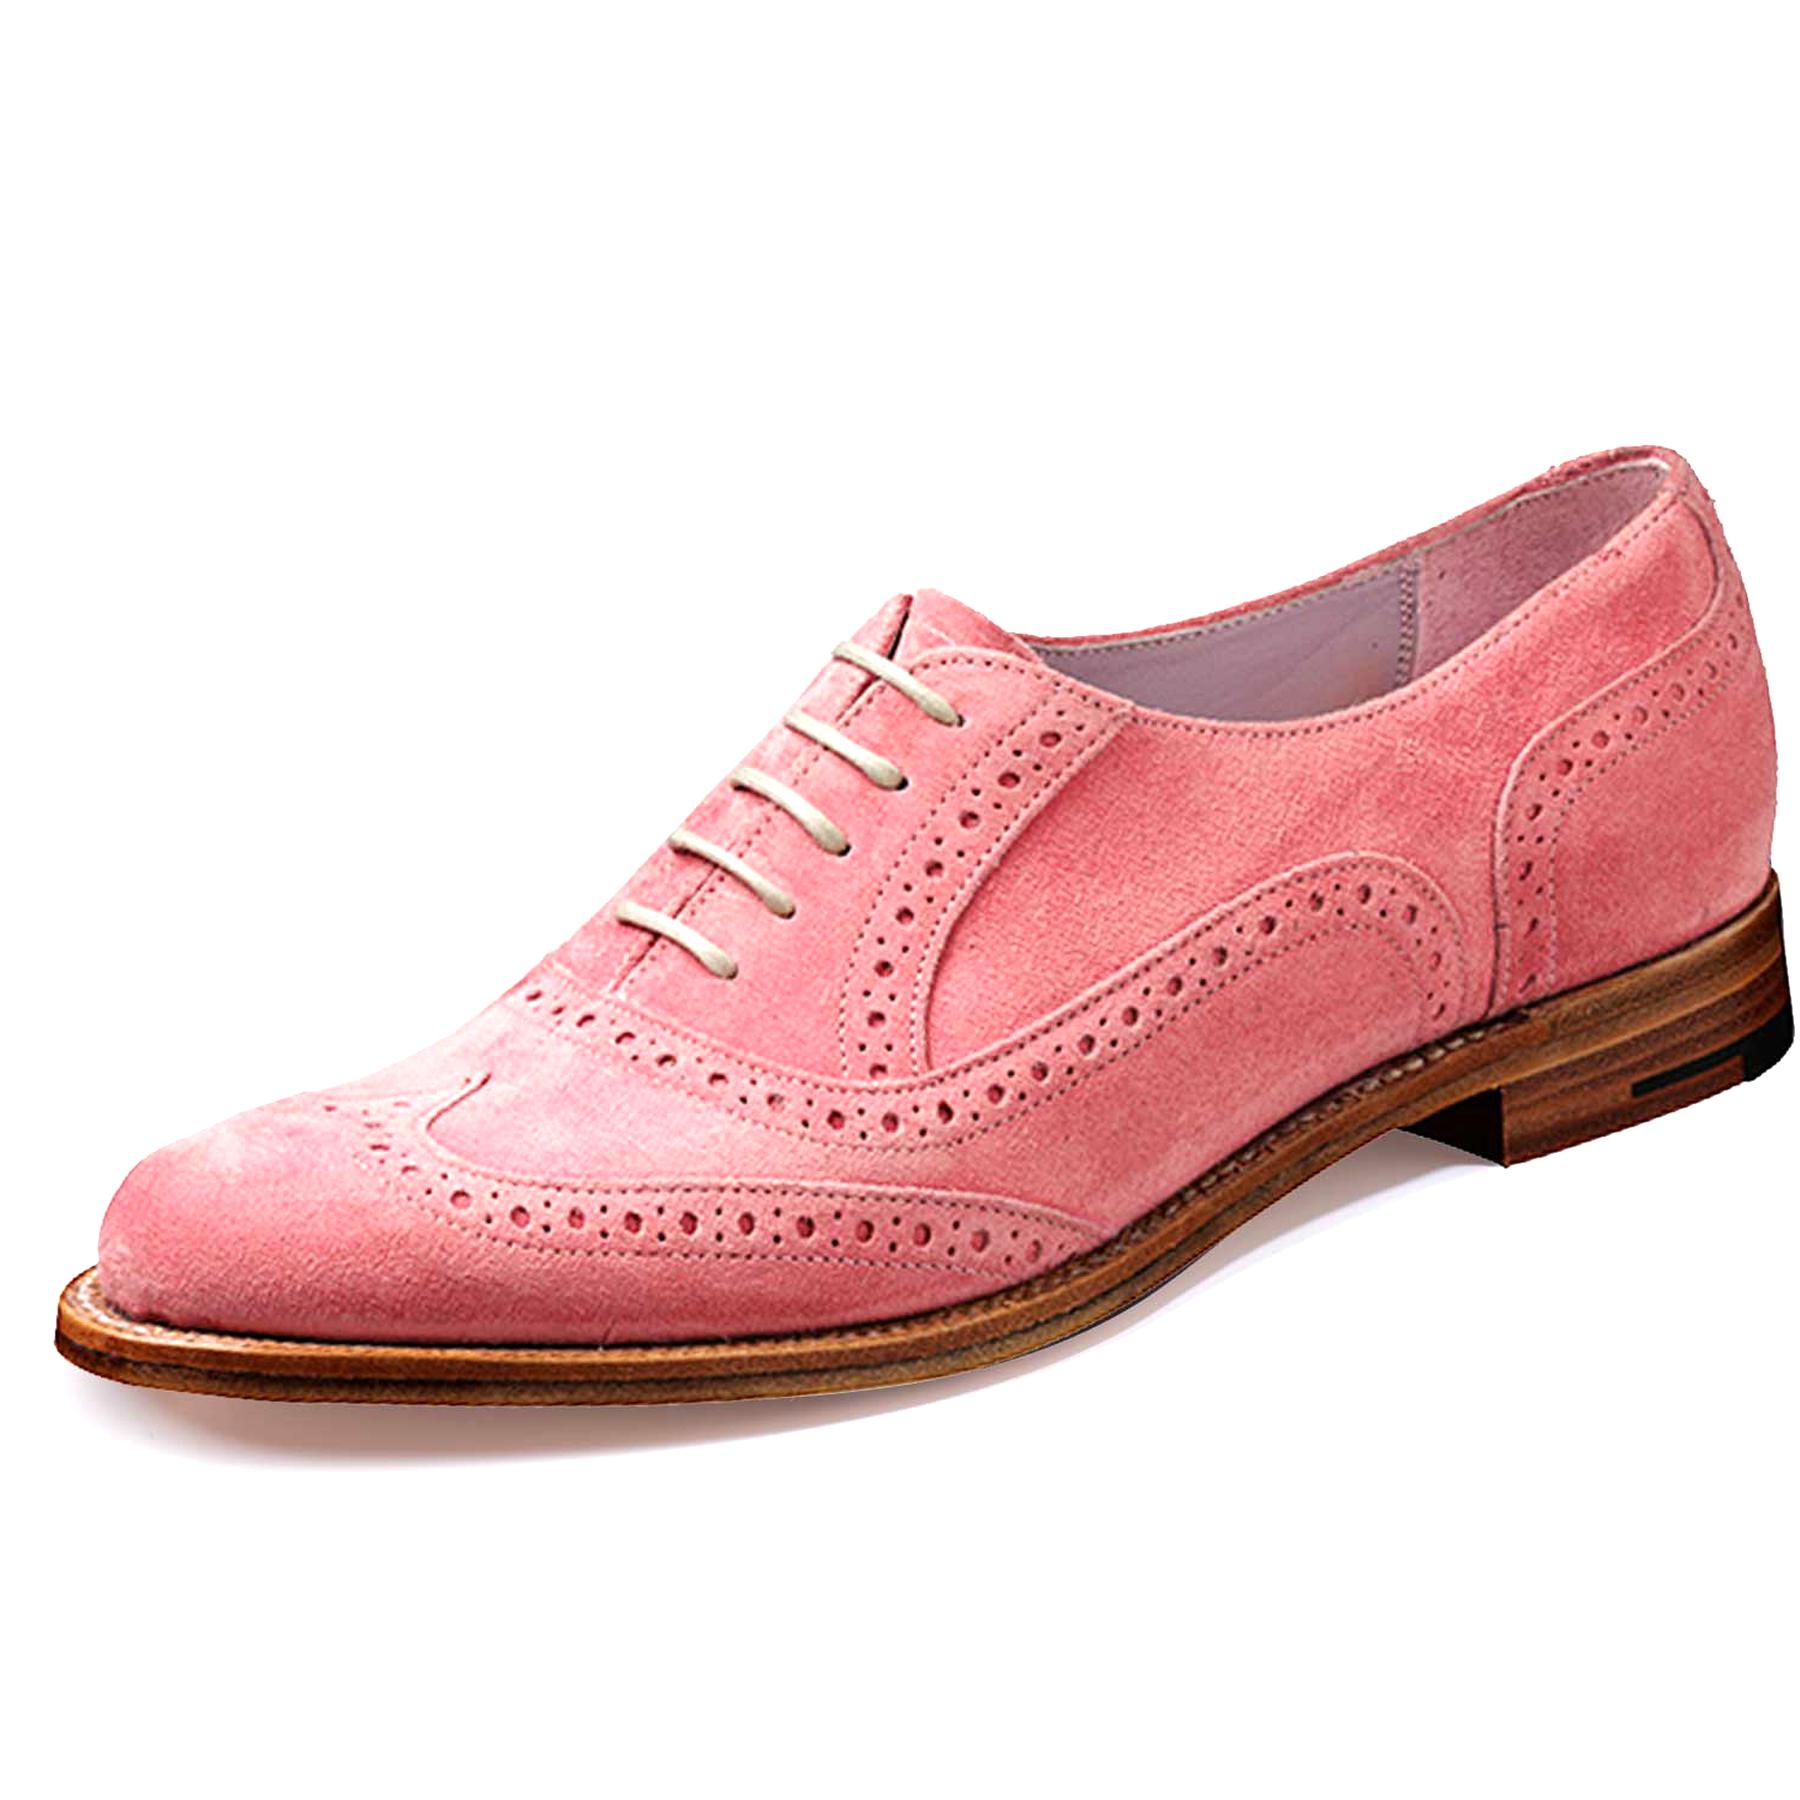 Ladies Brogues for sale in UK | 73 used 